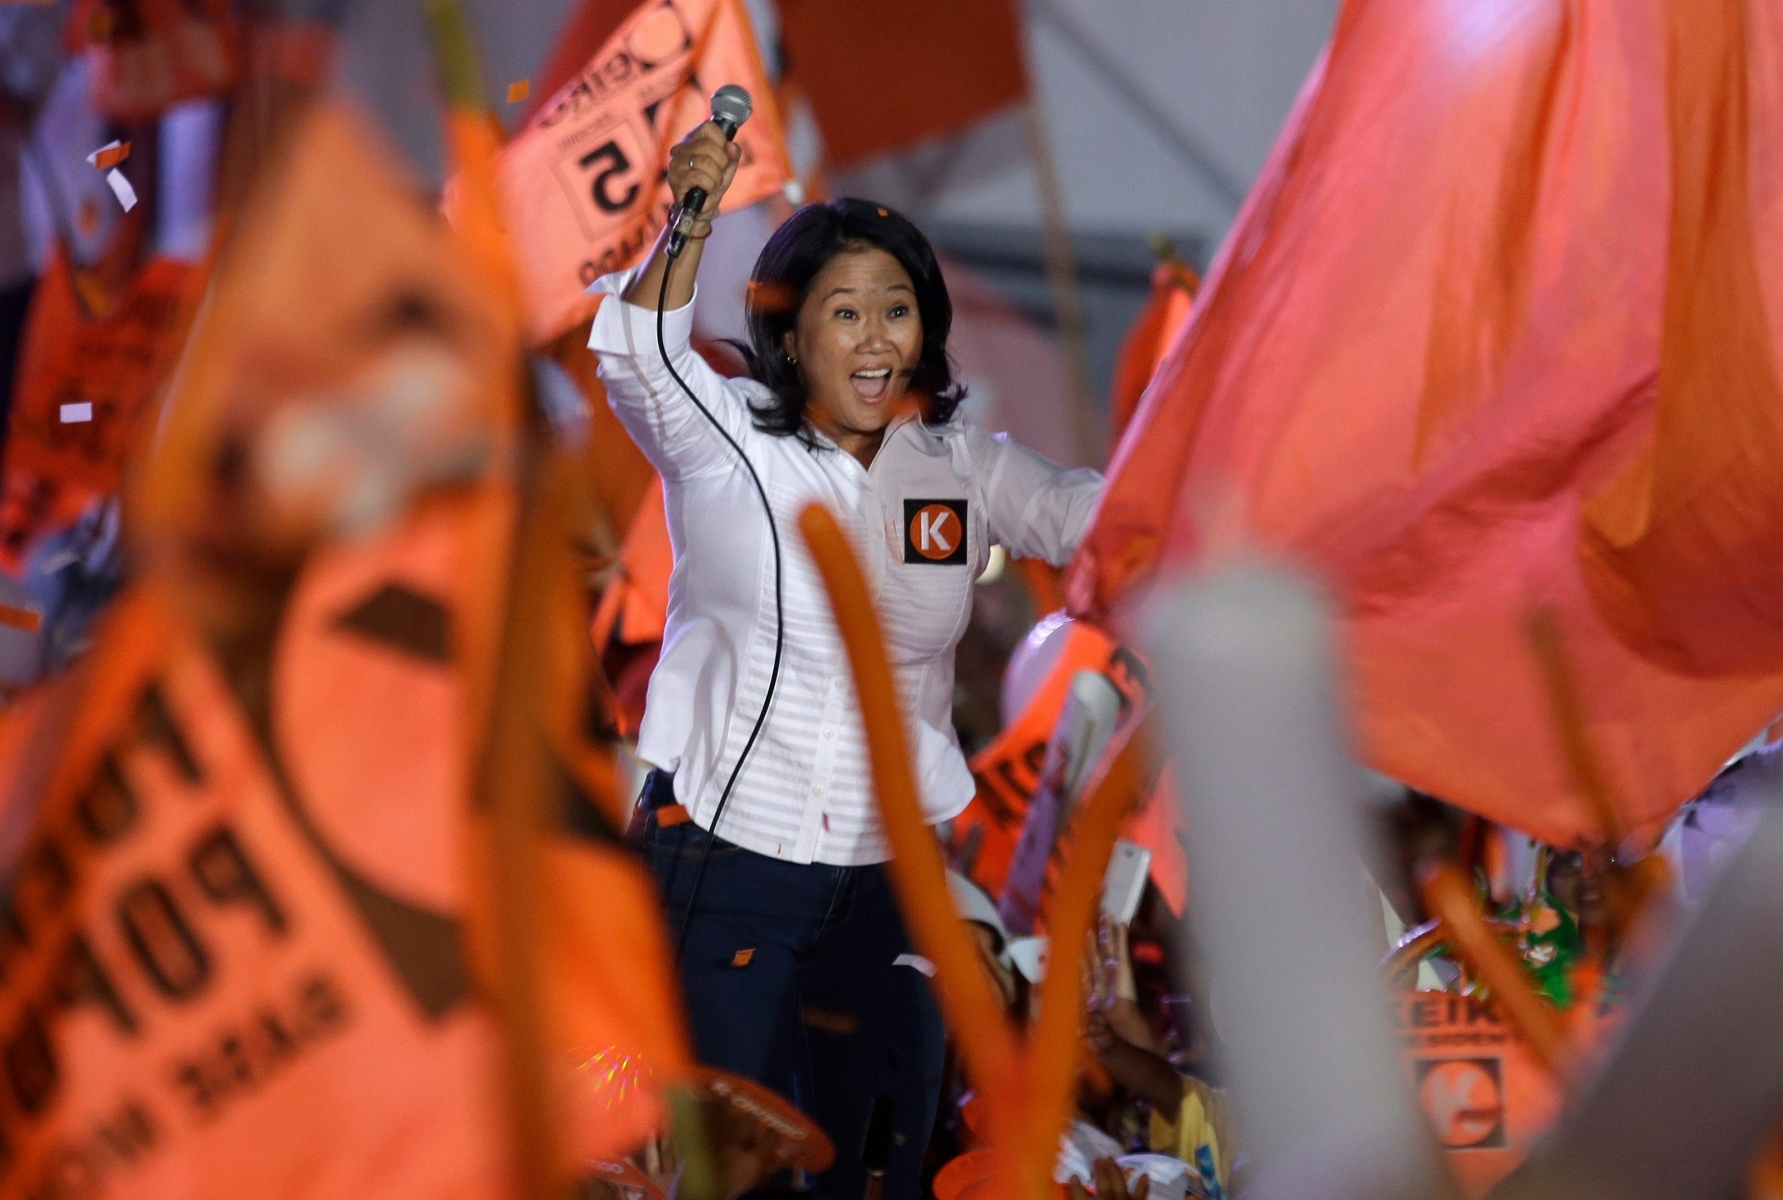 In this Thursday, April 7, 2016 photo, presidential candidate Keiko Fujimori waves at supporters during her closing presidential campaign rally in Lima, Peru. Keiko, the daughter of former President Alberto Fujimori, is the frontrunner in Peru's upcoming April 10 election. (AP Photo/Martin Mejia) The Week That Was in Latin America Photo Gallery